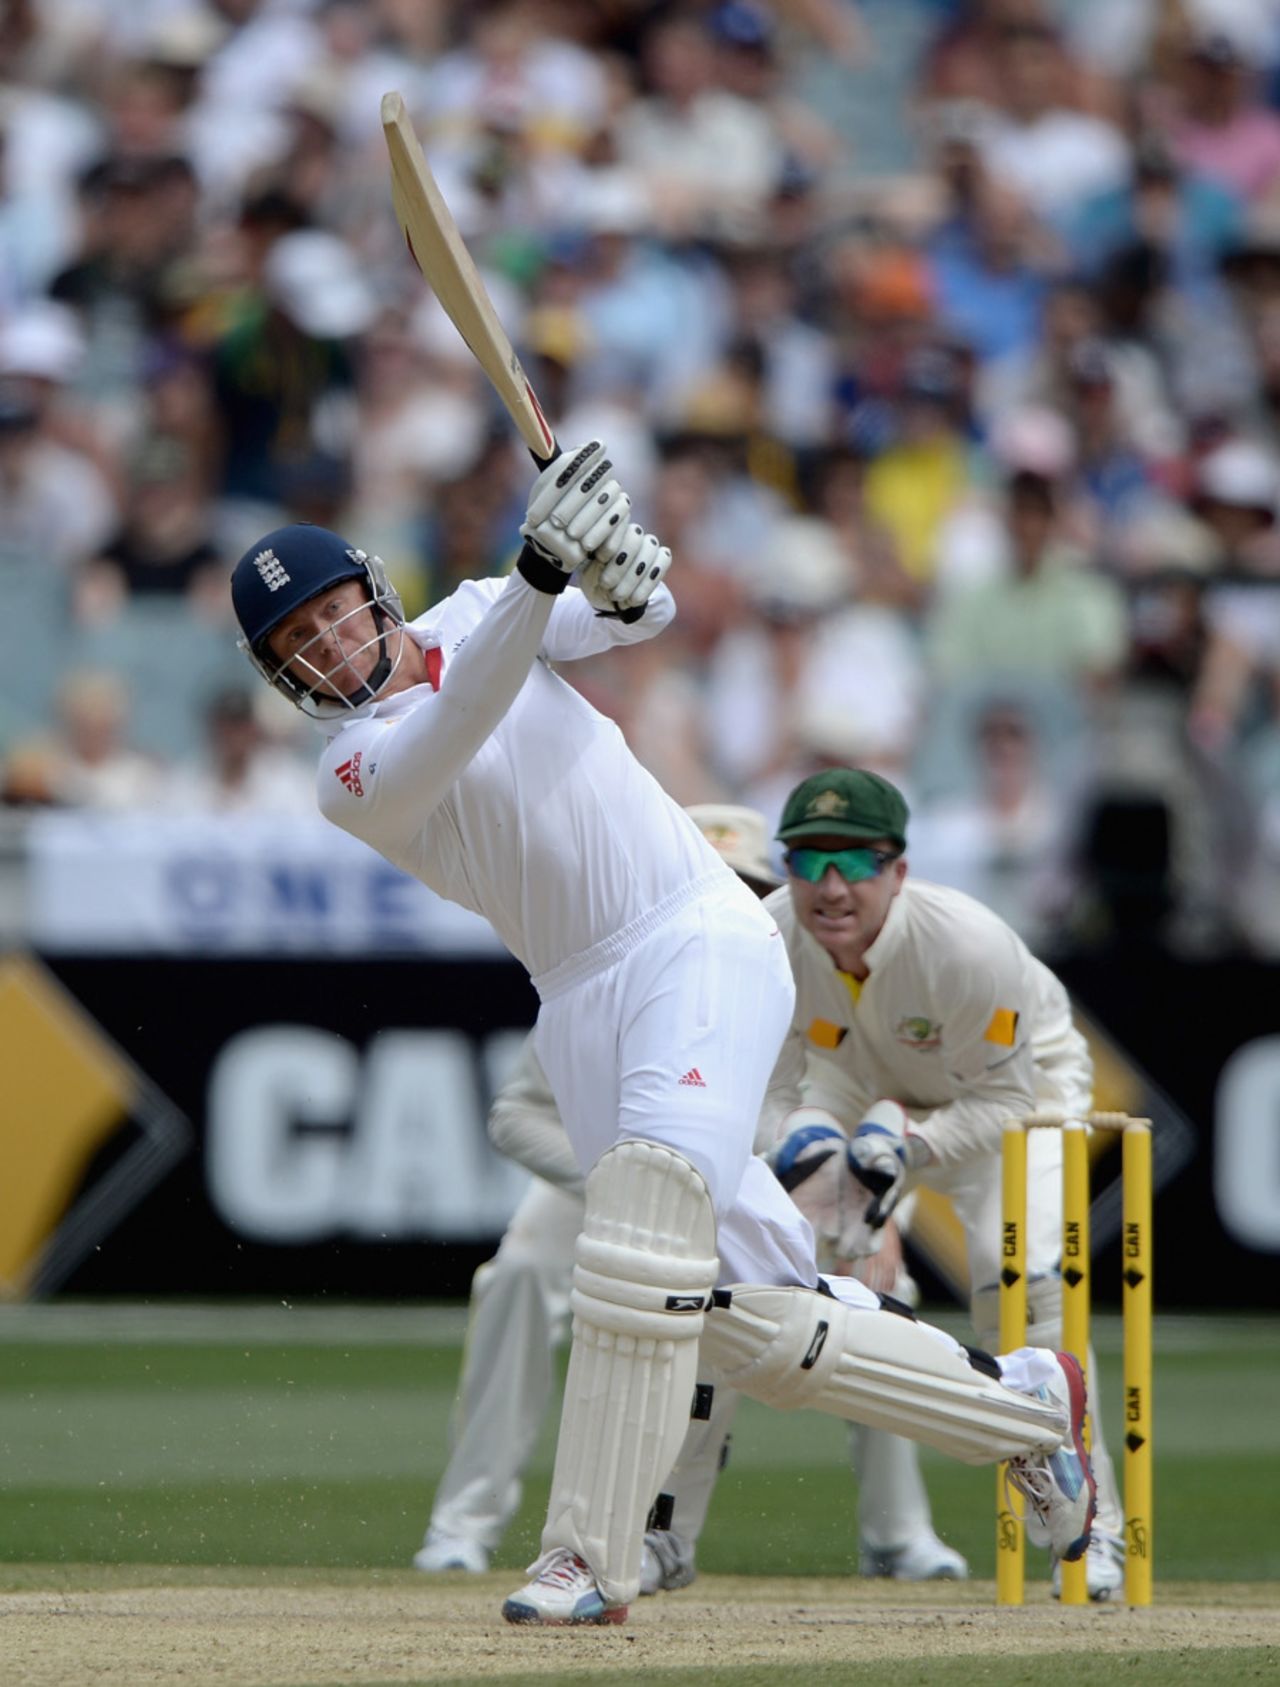 Jonny Bairstow began his innings with attacking intent, Australia v England, 4th Test, Melbourne, 3rd day, December 28, 2013